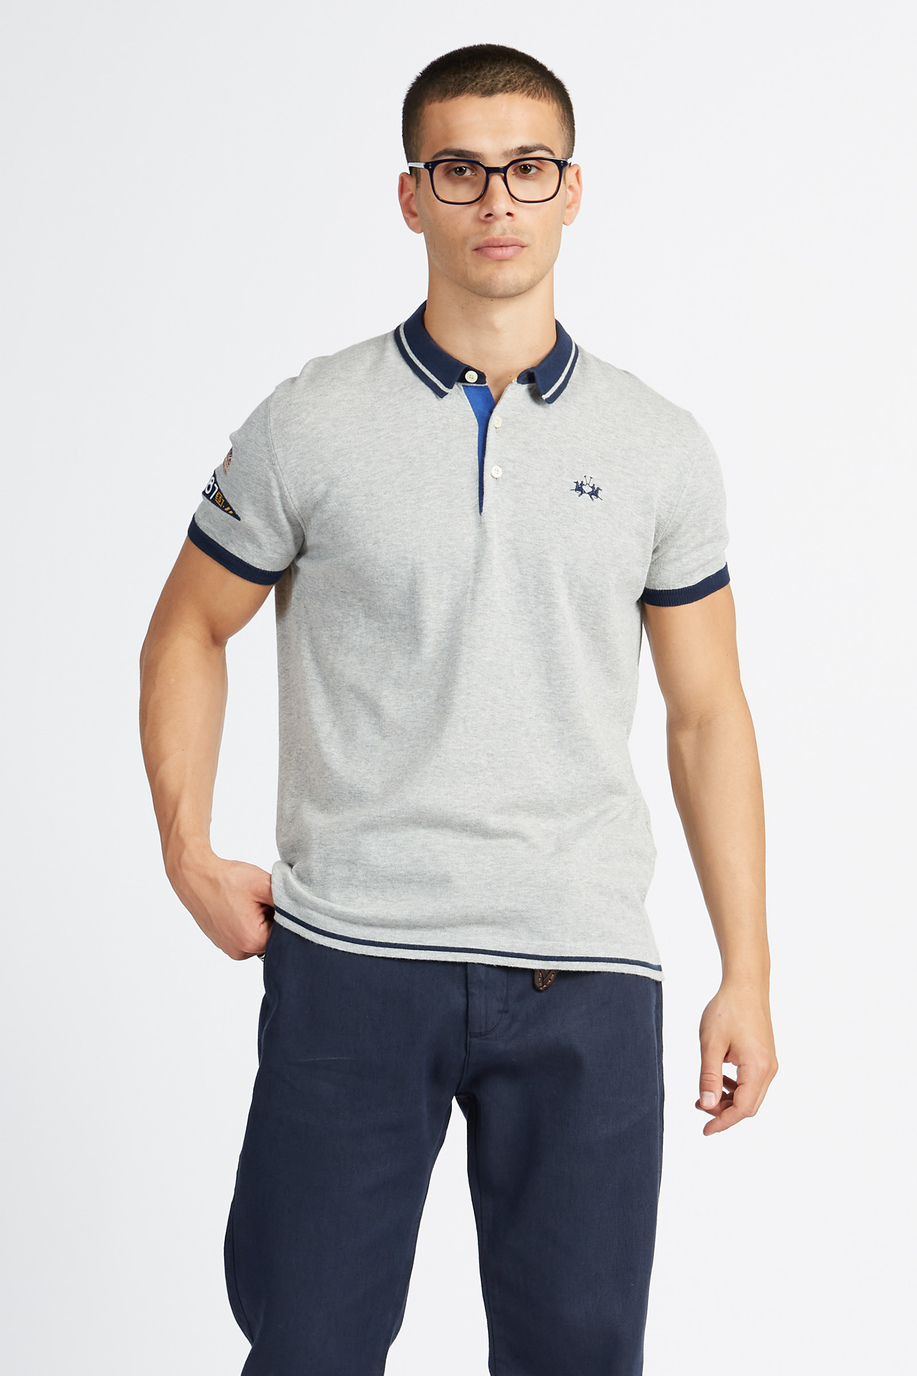 Short-sleeved men's tricot sweater in solid color Polo Academy - Victorin - Our favourites for him | La Martina - Official Online Shop